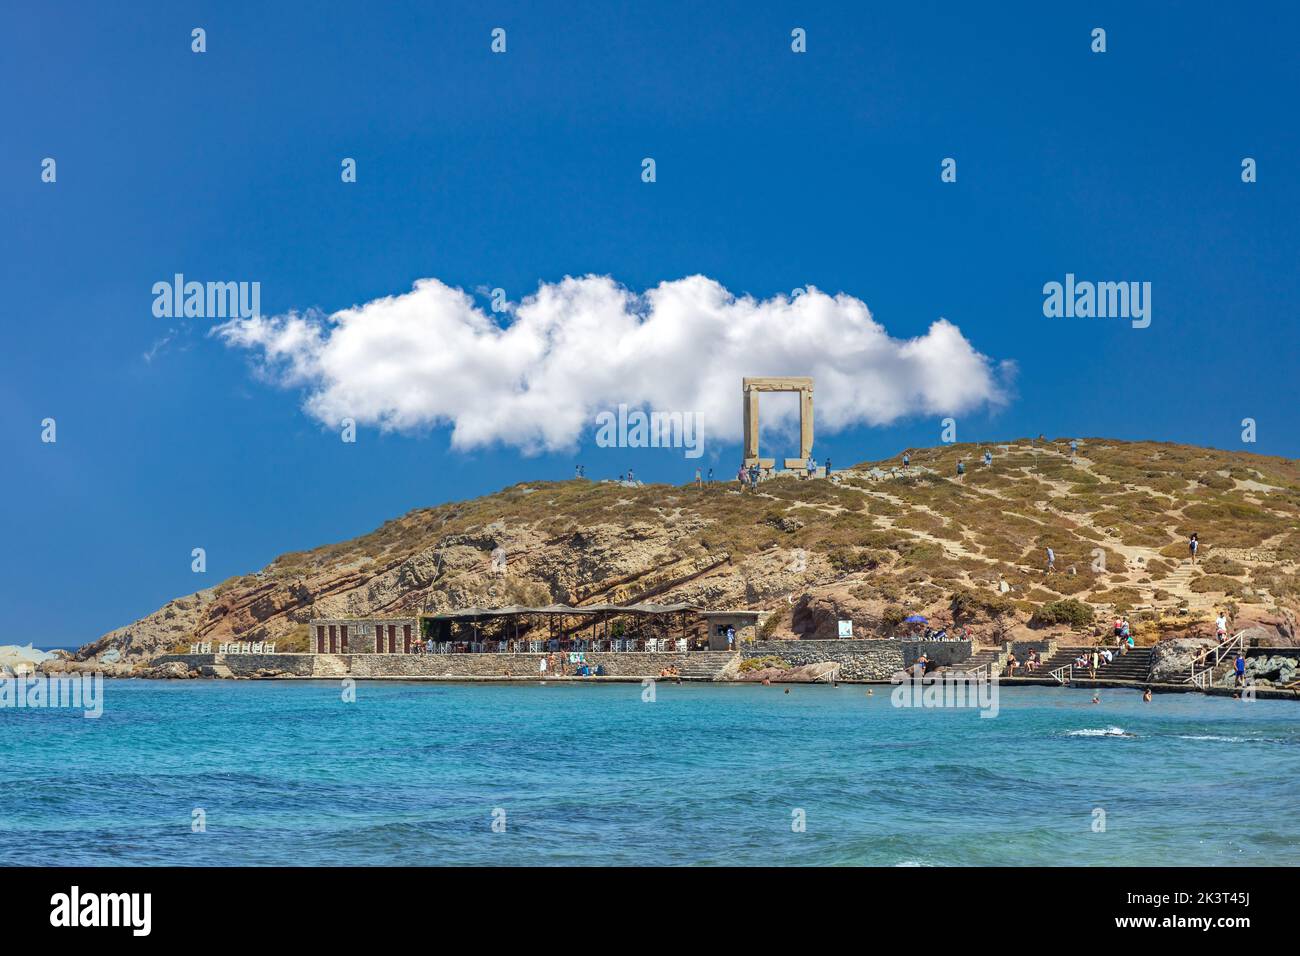 Naxos island, Cyclades Greece. Tourists at Temple of Apollo, Cafe at seaside of the islet of Palatia at harbor. Summer destination. Stock Photo